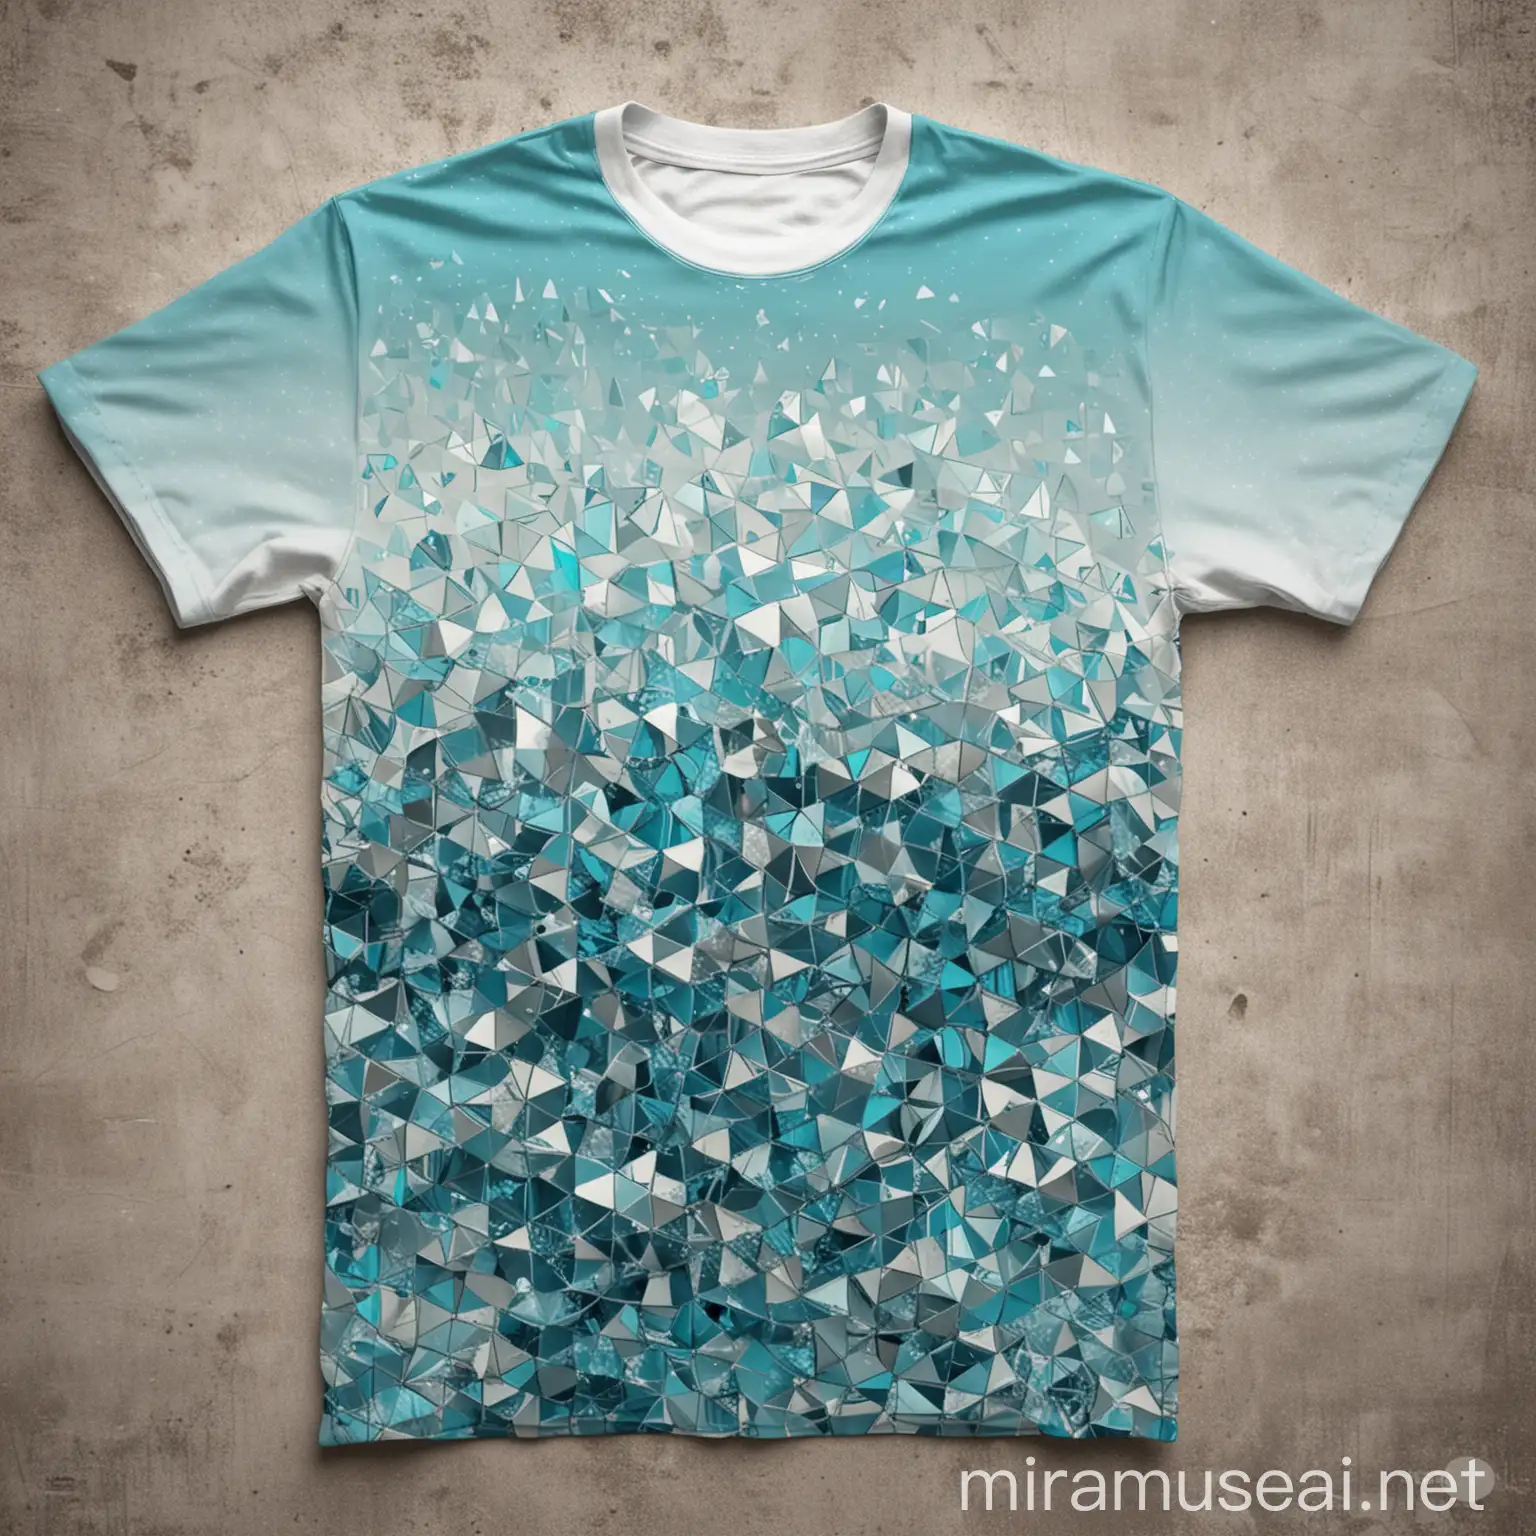 mockup tshirt, abstract, non symetrical, small sea, waves, triangles, rectangles, pattern, fractal art style, like a  broken glass,  blue, cyan, white, silver, gradient